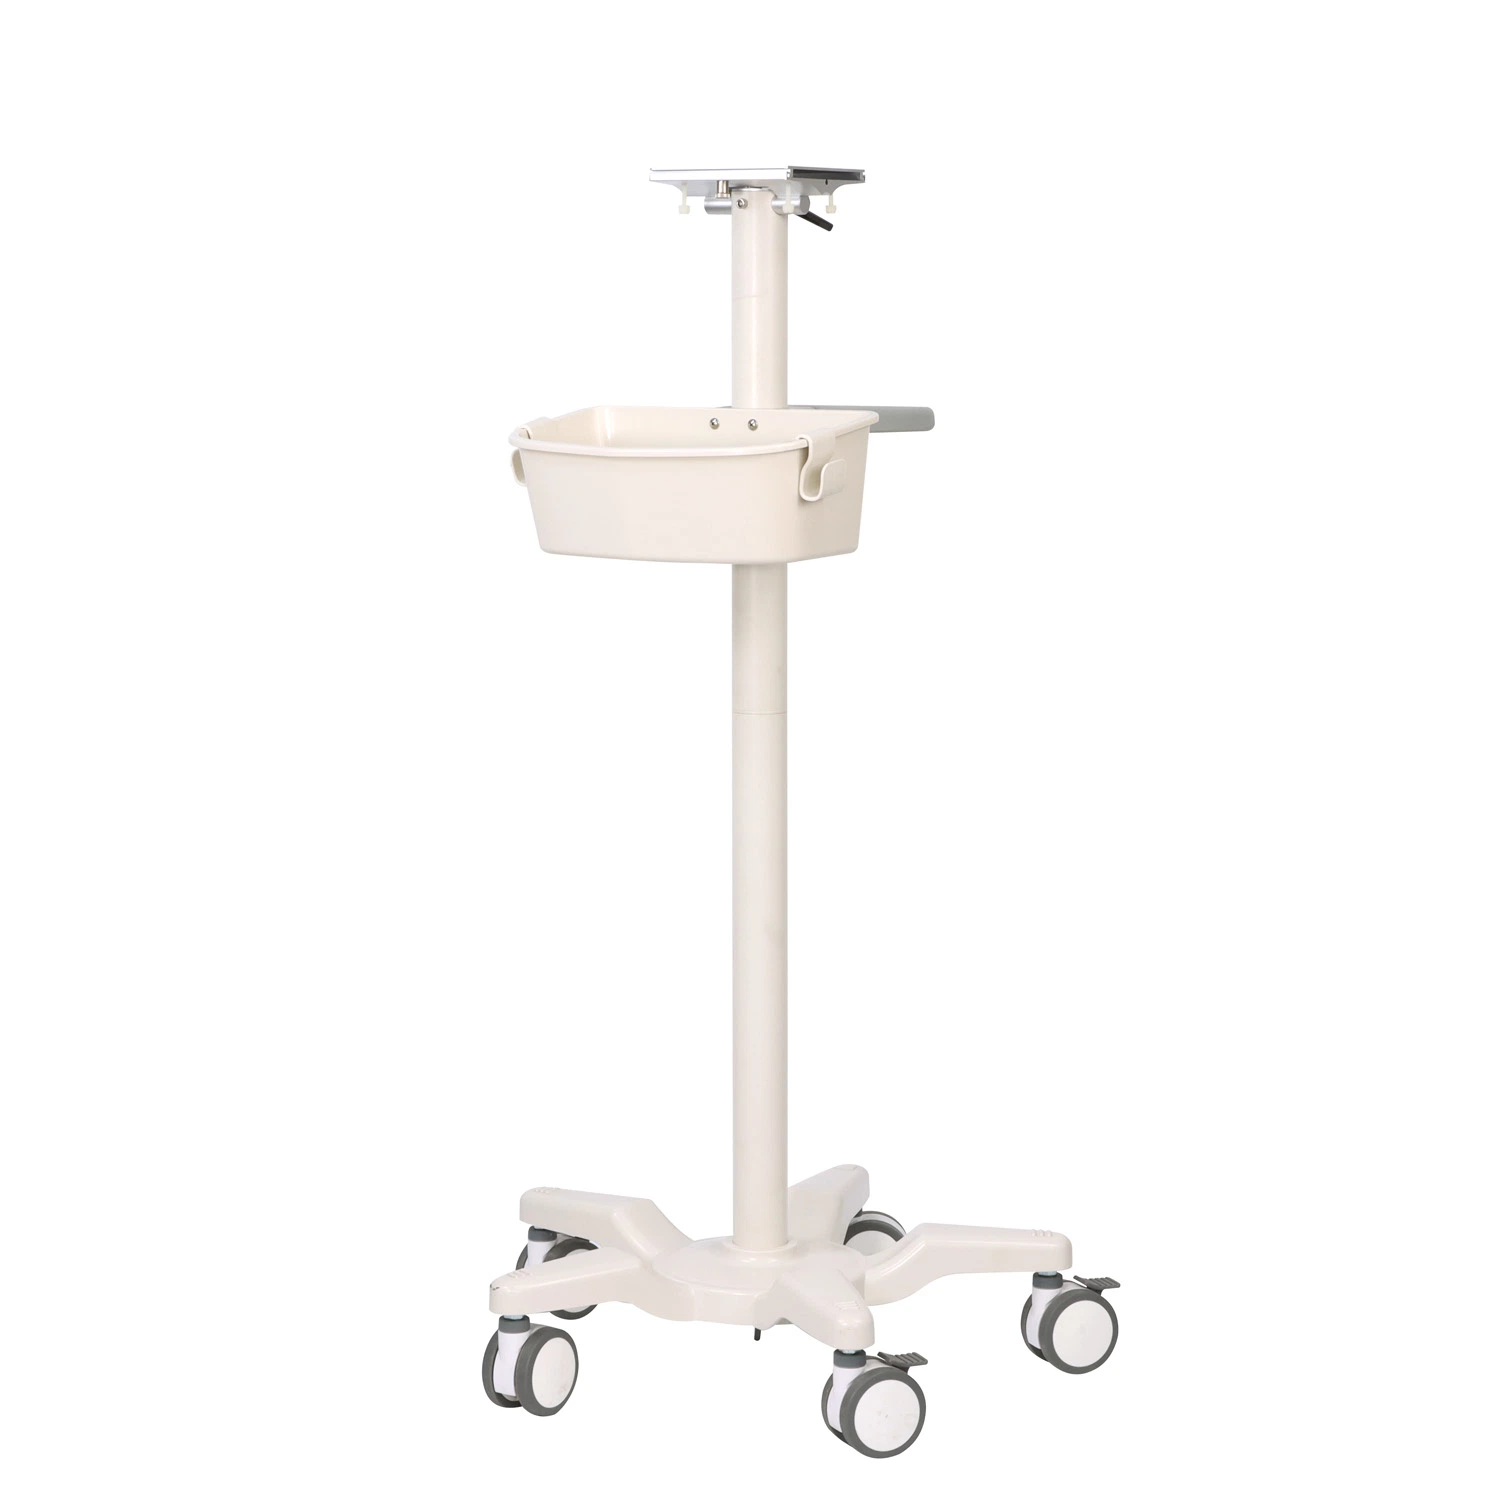 Mobile Medical Device Hospital Patient Monitor Trolley Cart Manufacturer